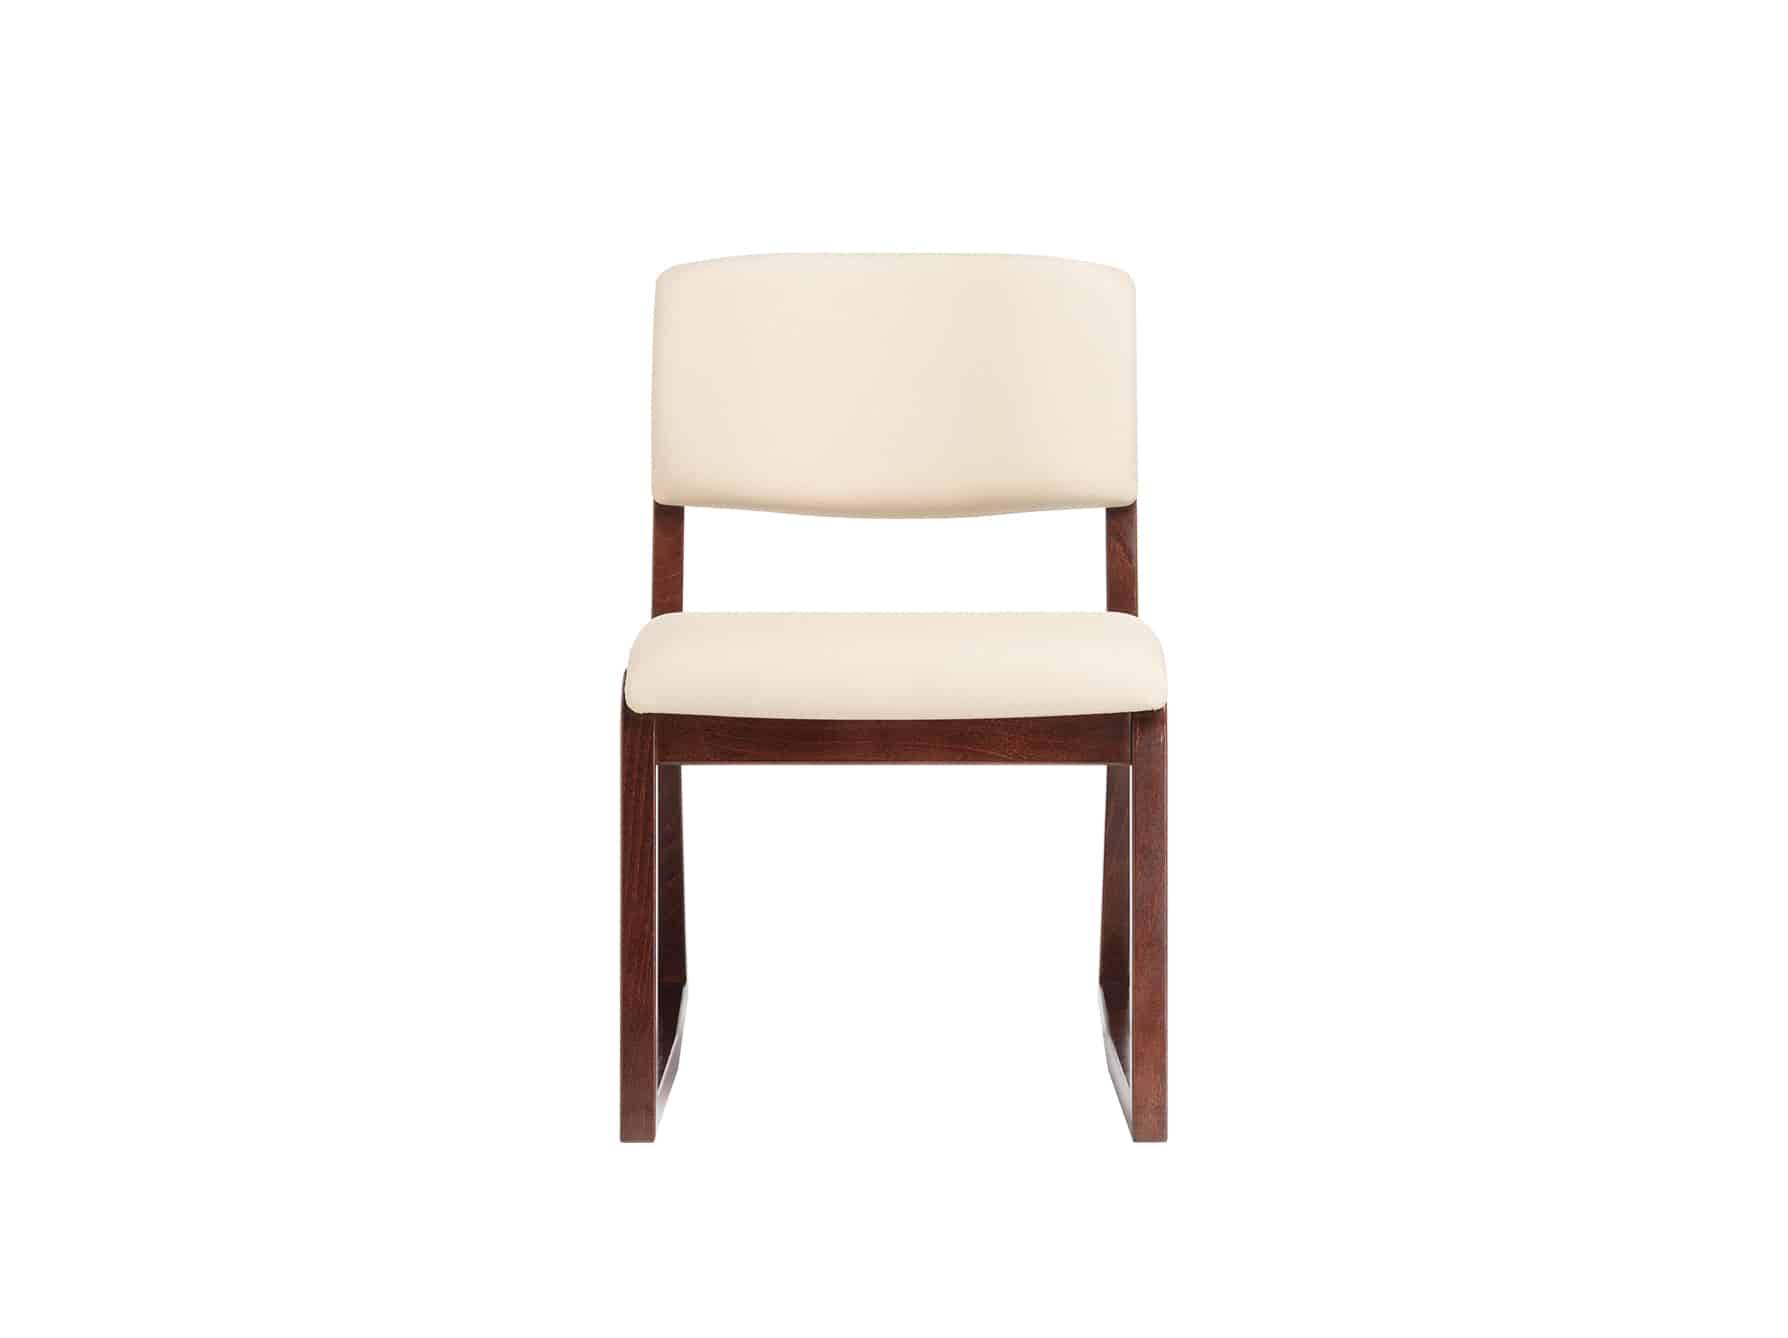 PlyWedge 2-Position Chair with upholstered seat and back